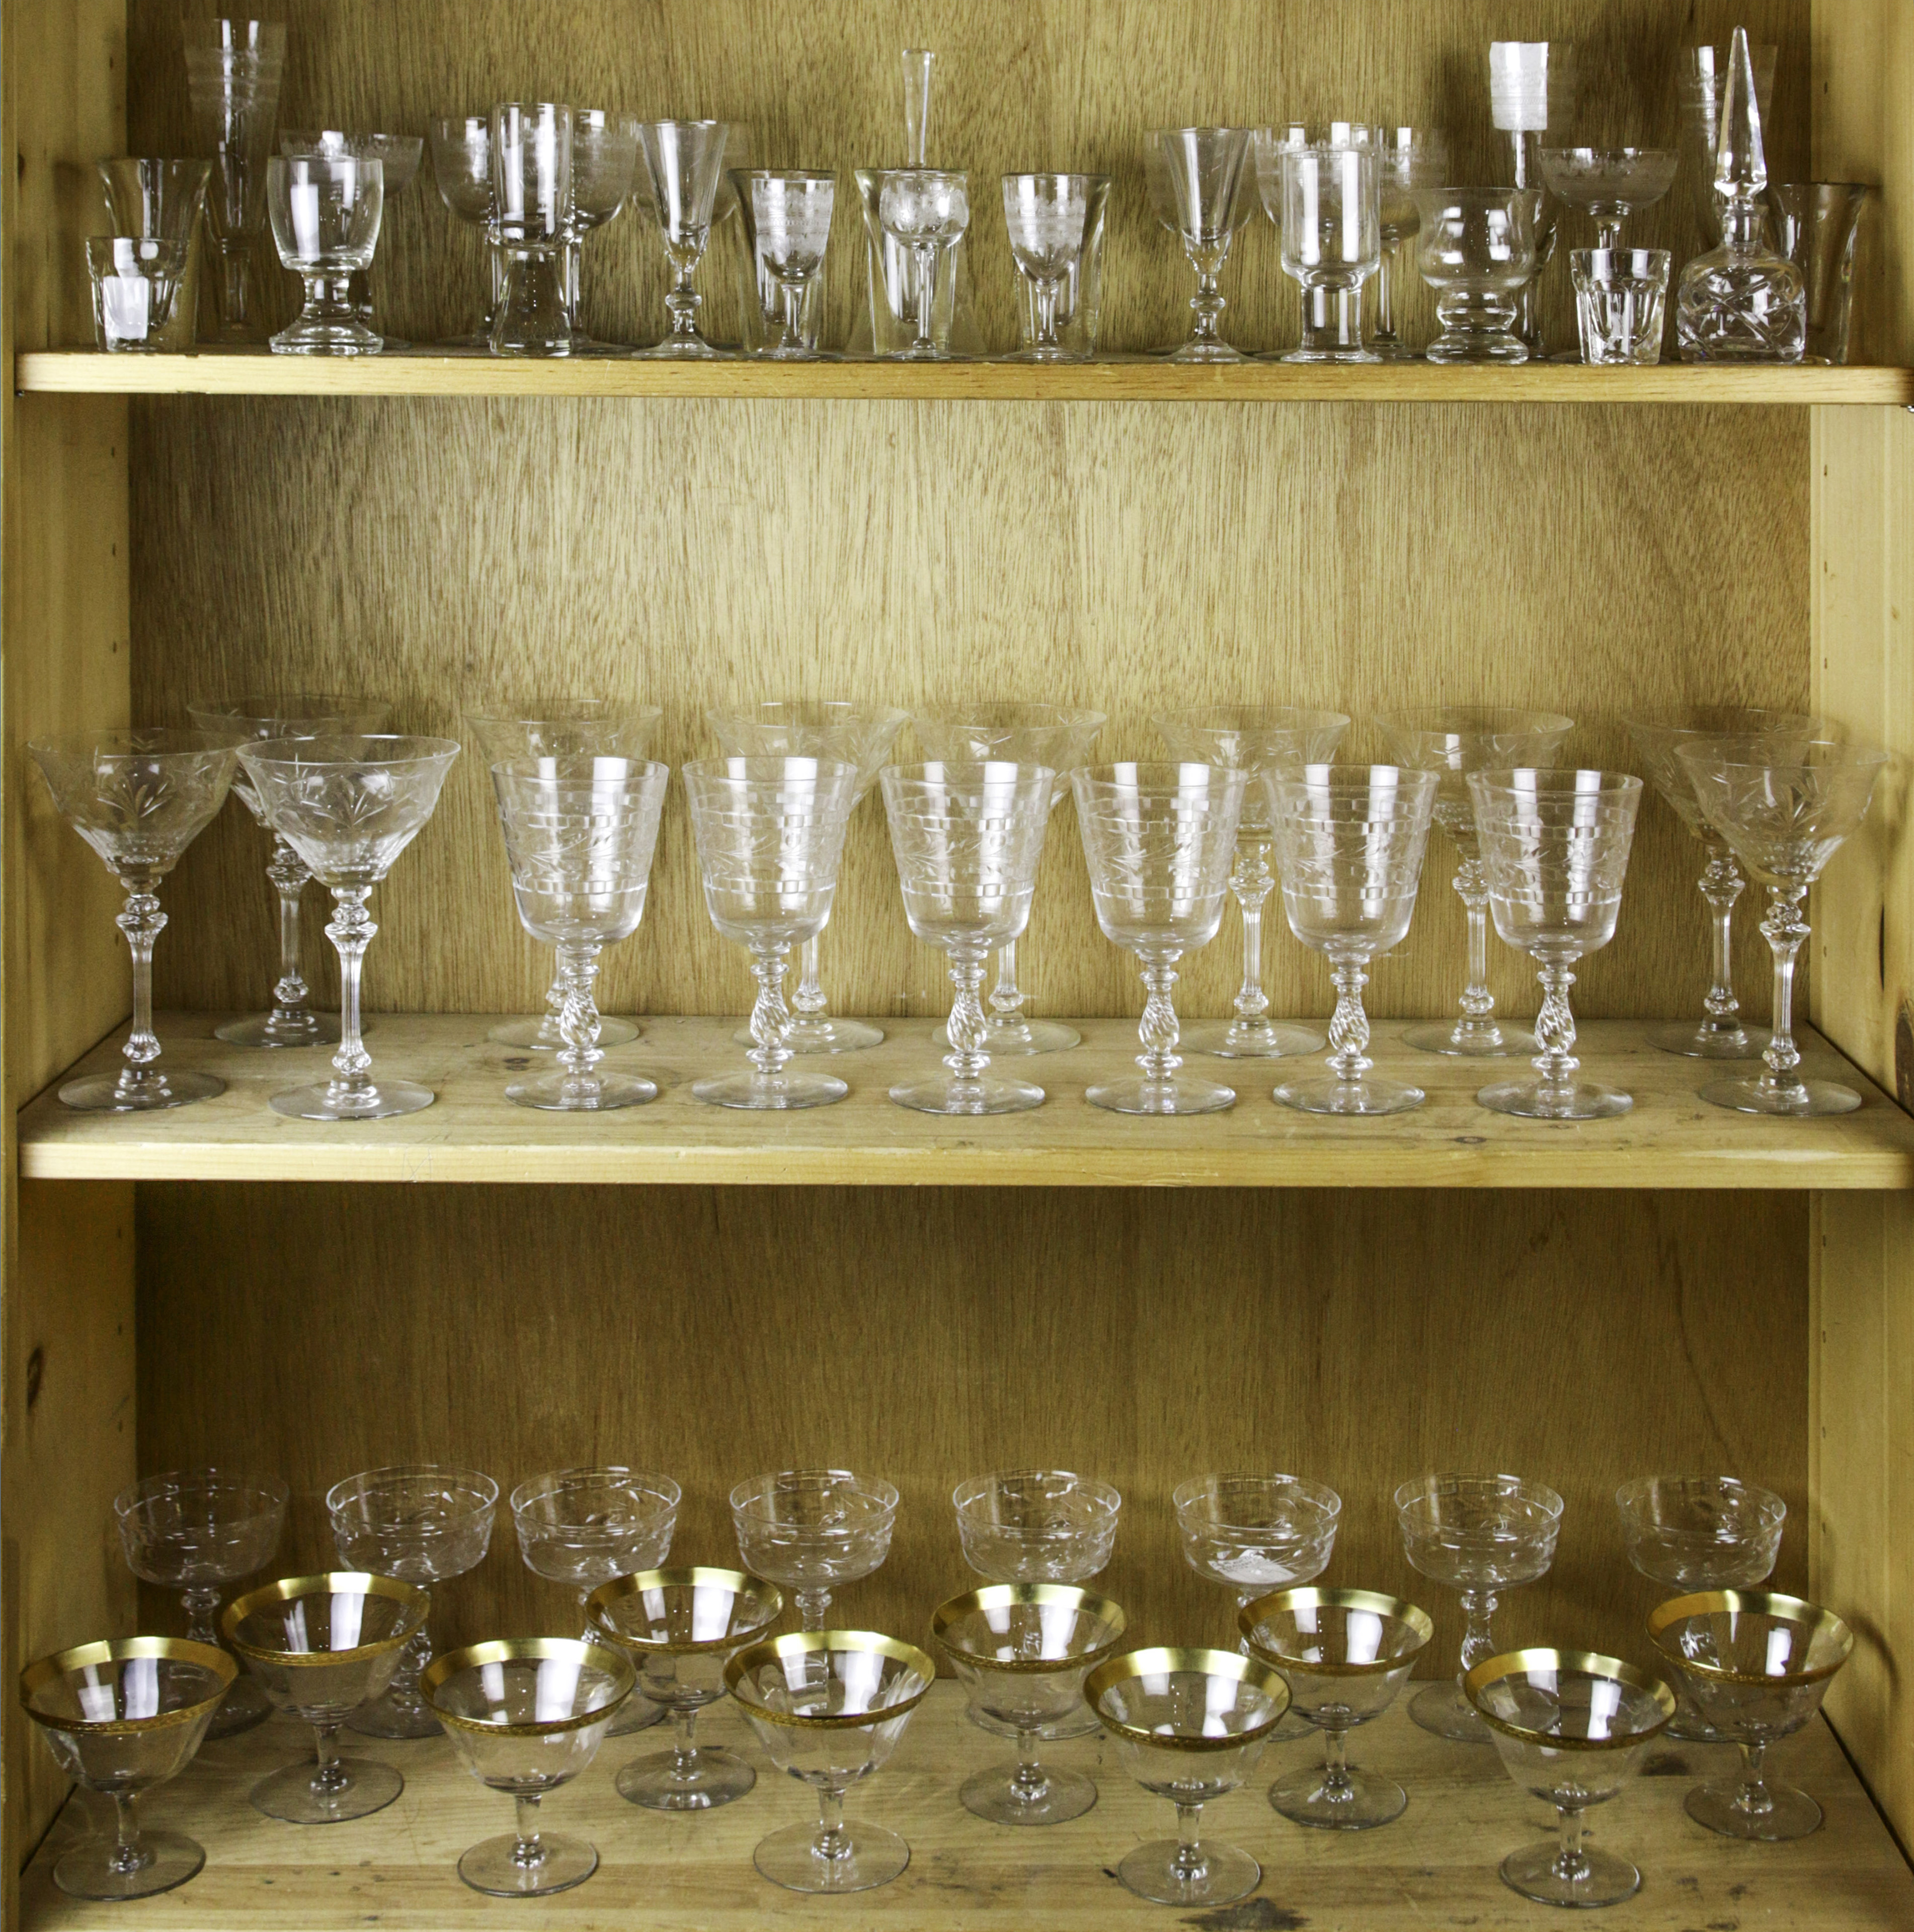 THREE SHELVES OF ETCHED GLASS STEMWARE